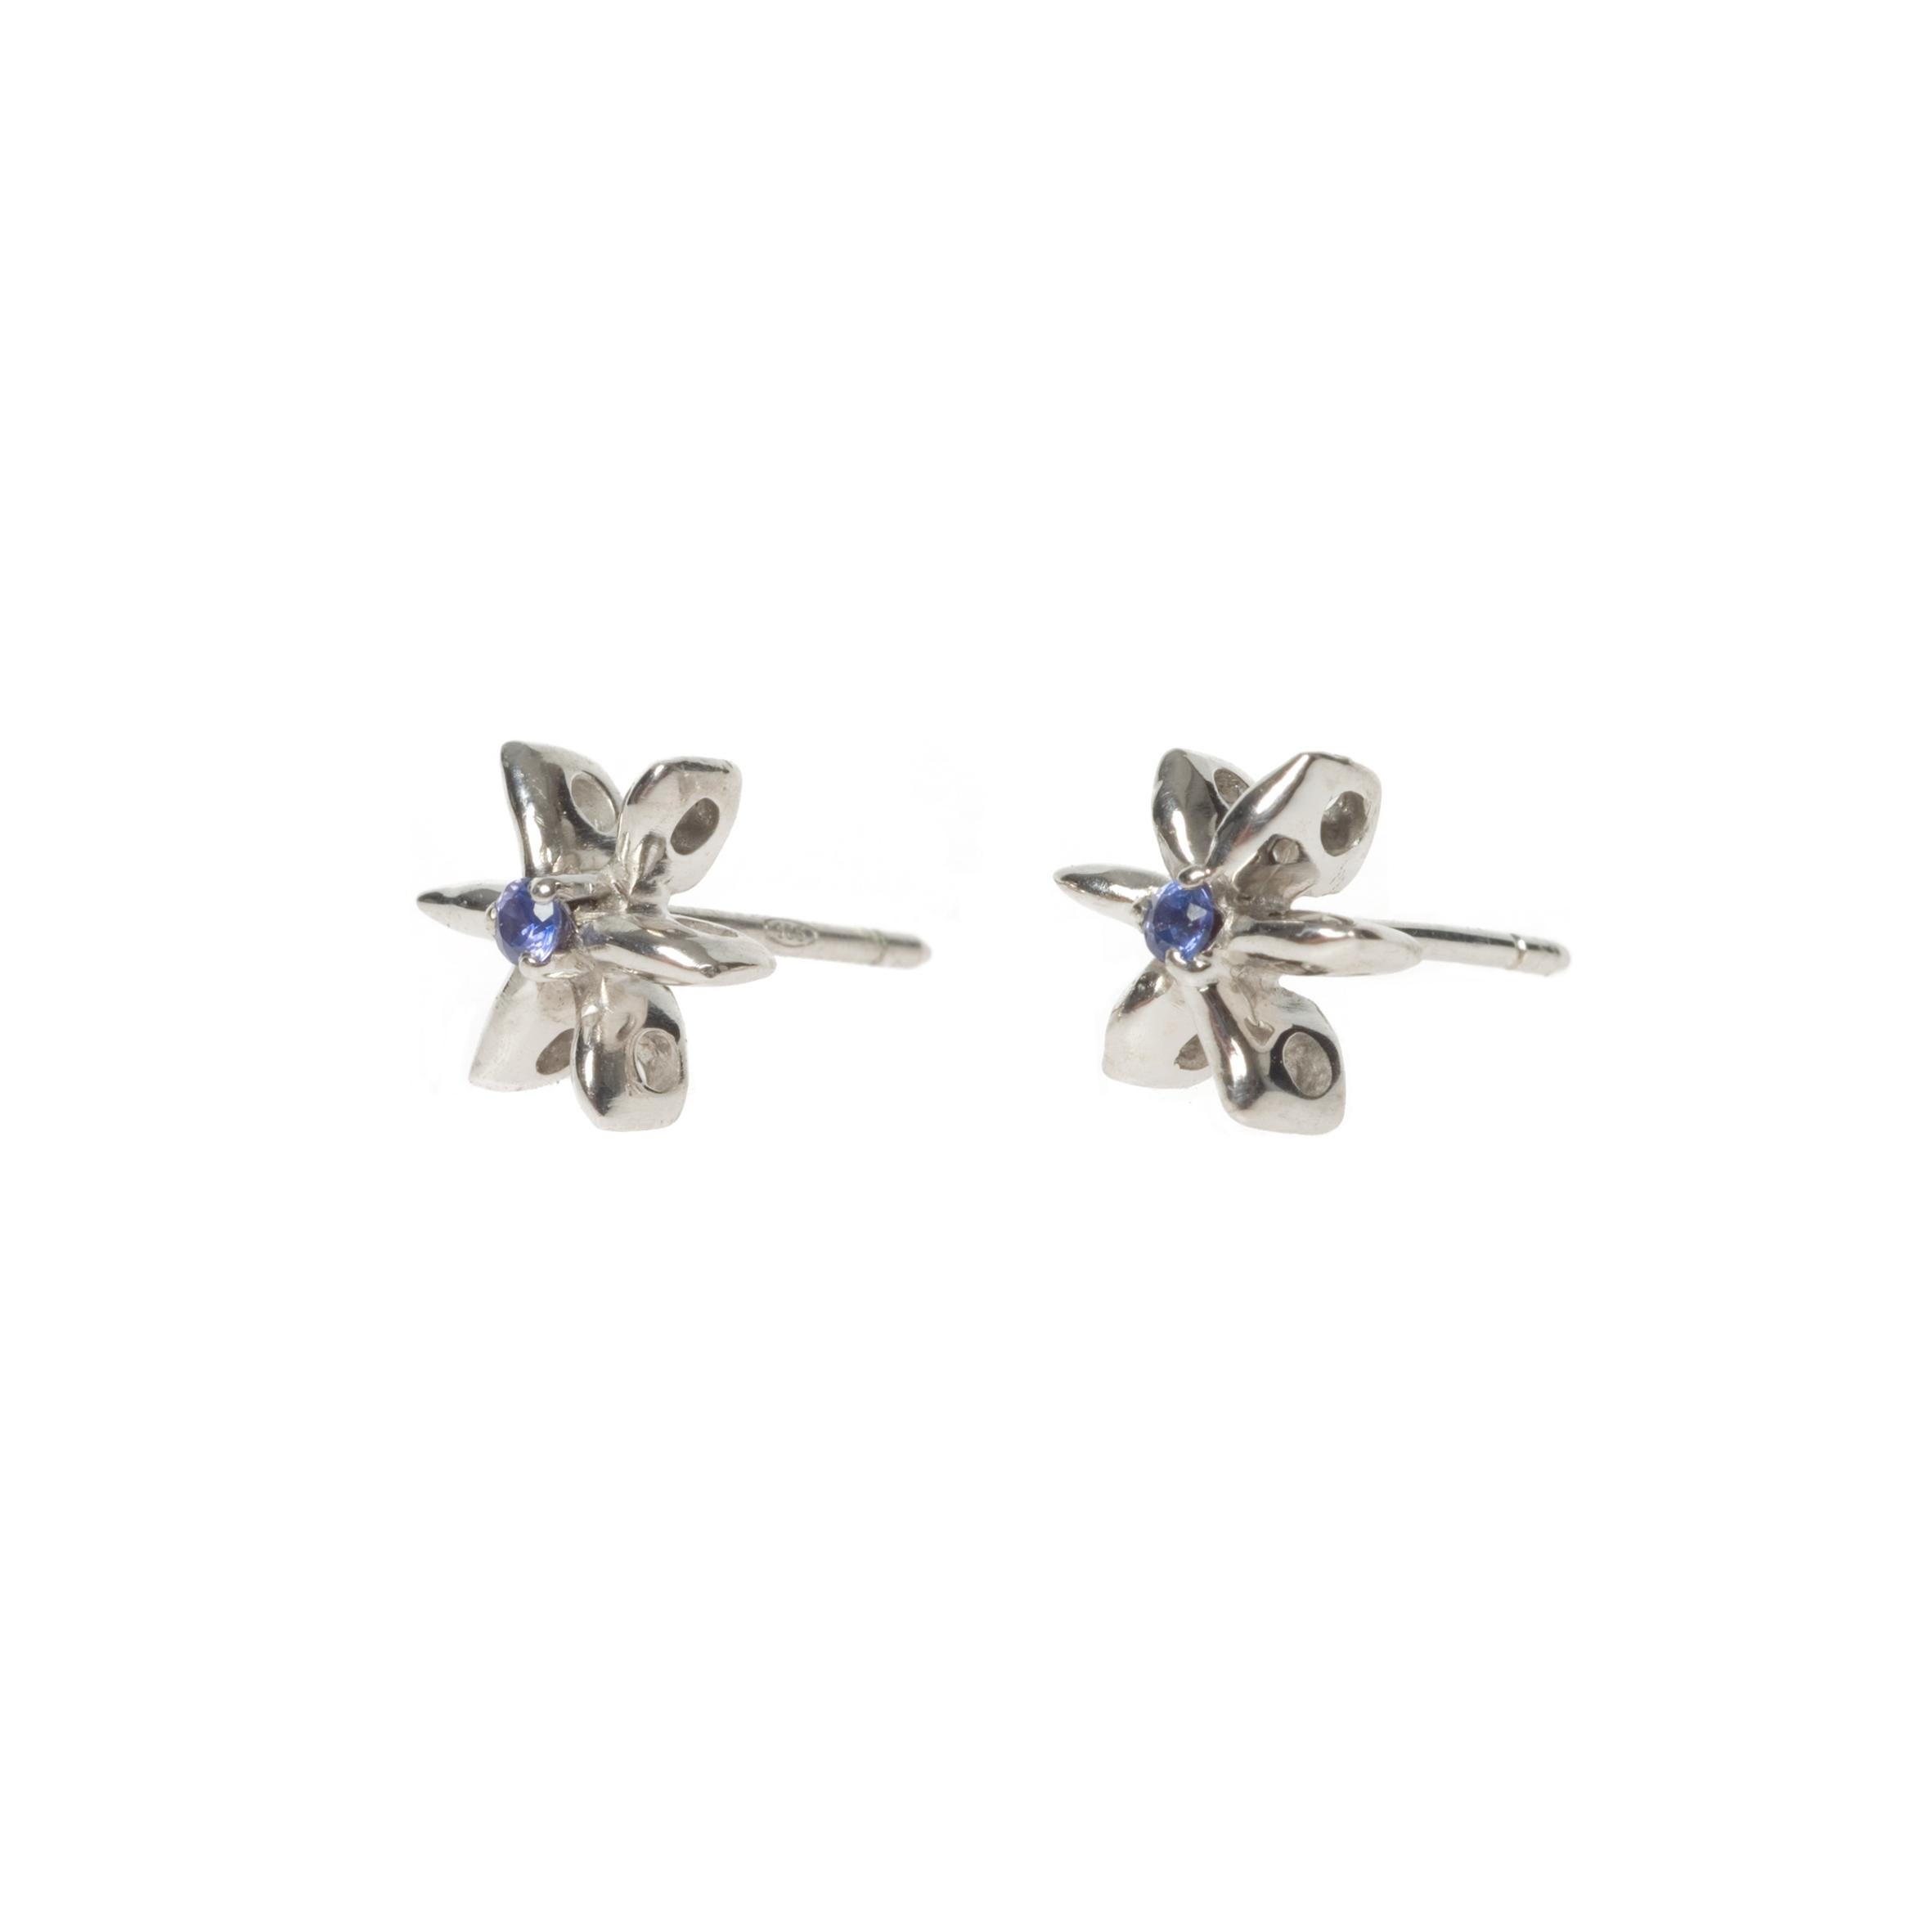 These pretty dainty Daisy earrings have been set with Blue Sapphires in White Gold. We think they look fabulous in White Diamonds or with other birthstones too and can make these to order in our workshop in Italy for you. I would be delighted to